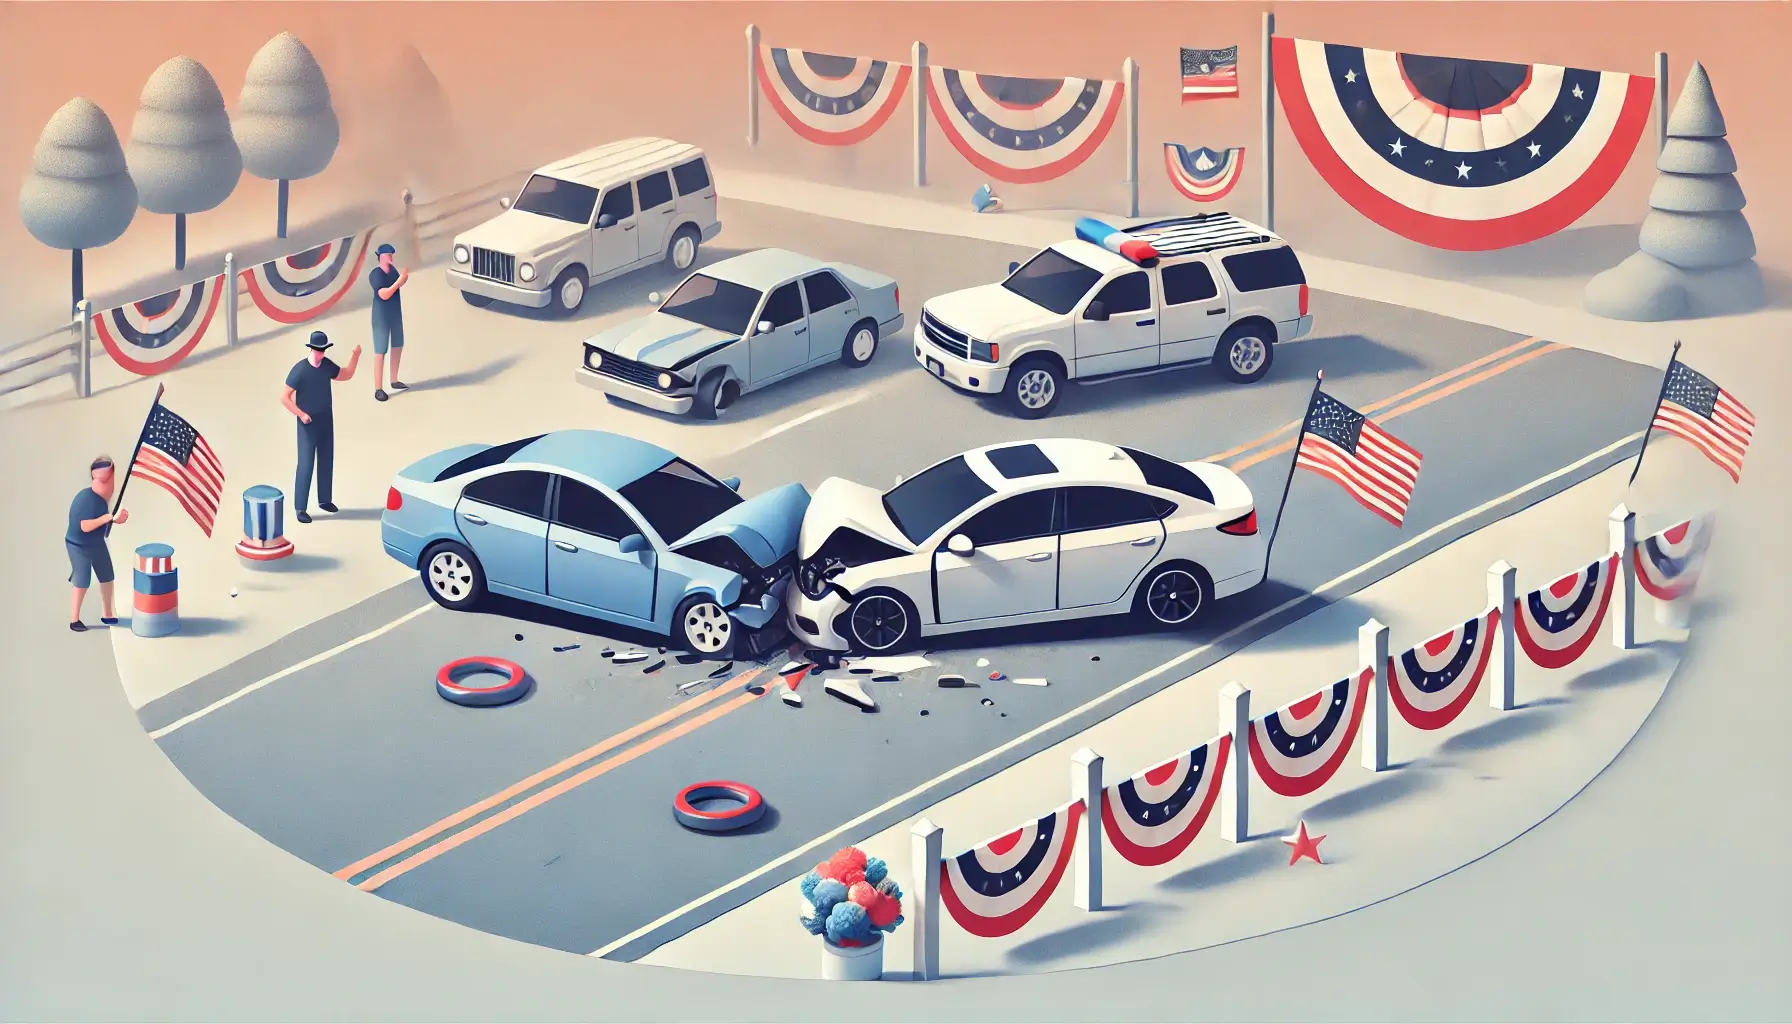 Depiction of a car crash on a road with Fourth of July decorations, highlighting the increased risk of accidents during Independence Day celebrations.